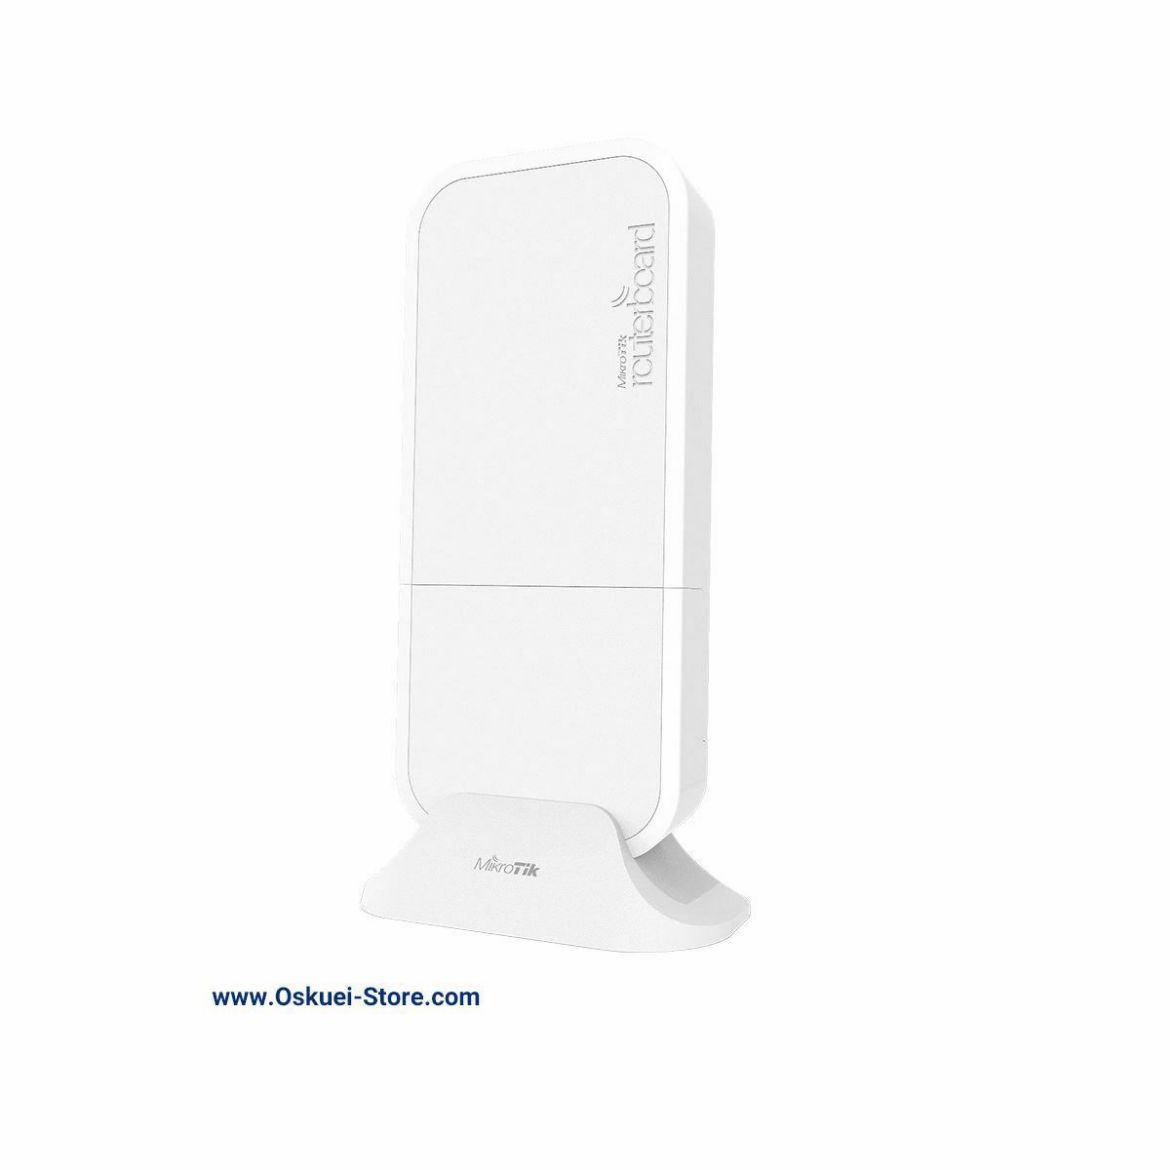 MikroTik RBwAPGR-5HacD2HnD&R11e-LTE Wireless Access Point Front